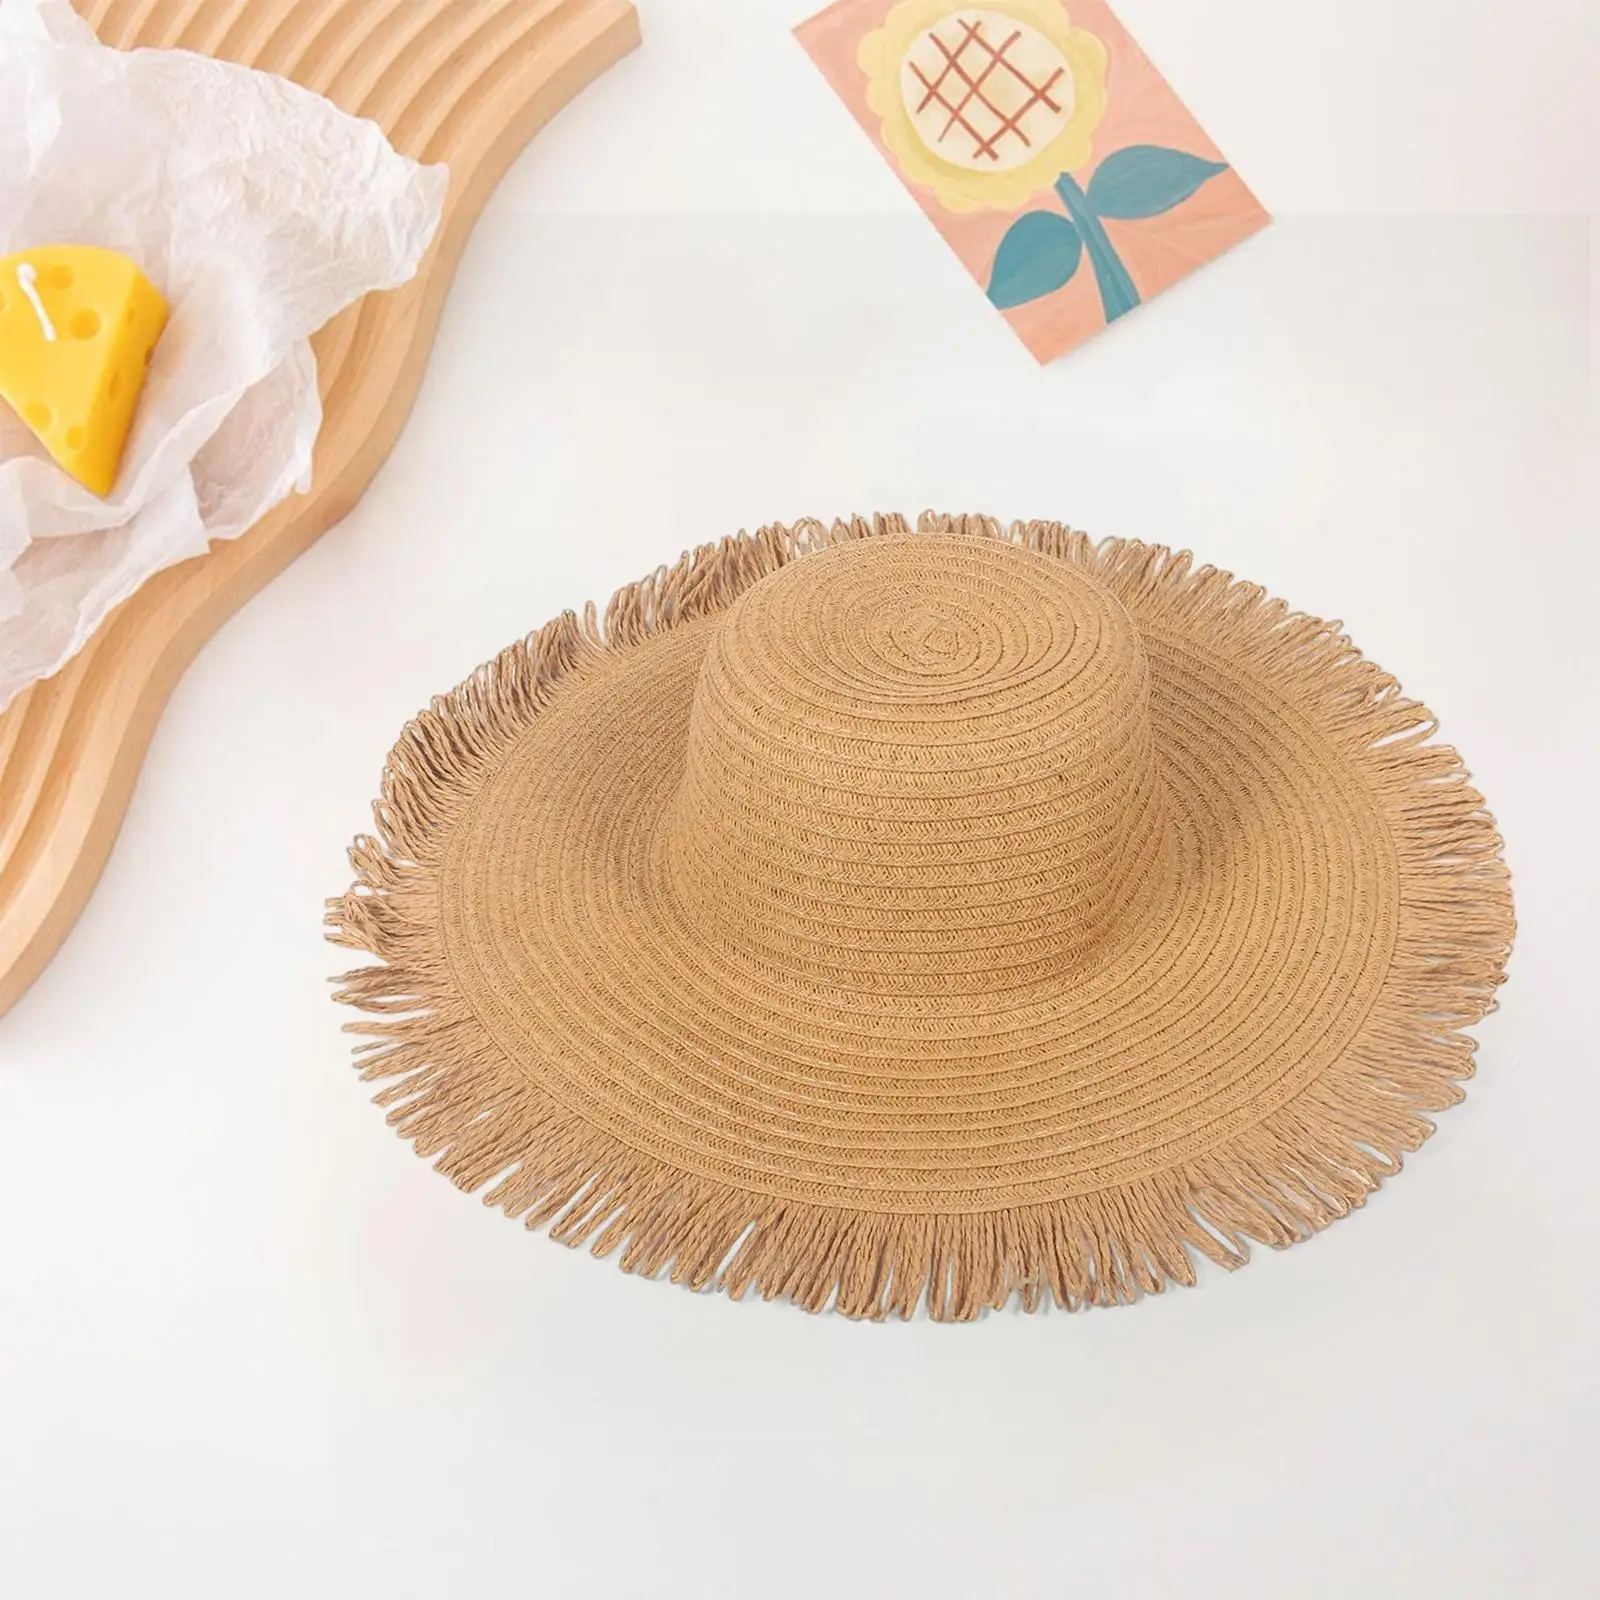 Straw Sun Hat Tassels  Protective Large Sunhat  for Party